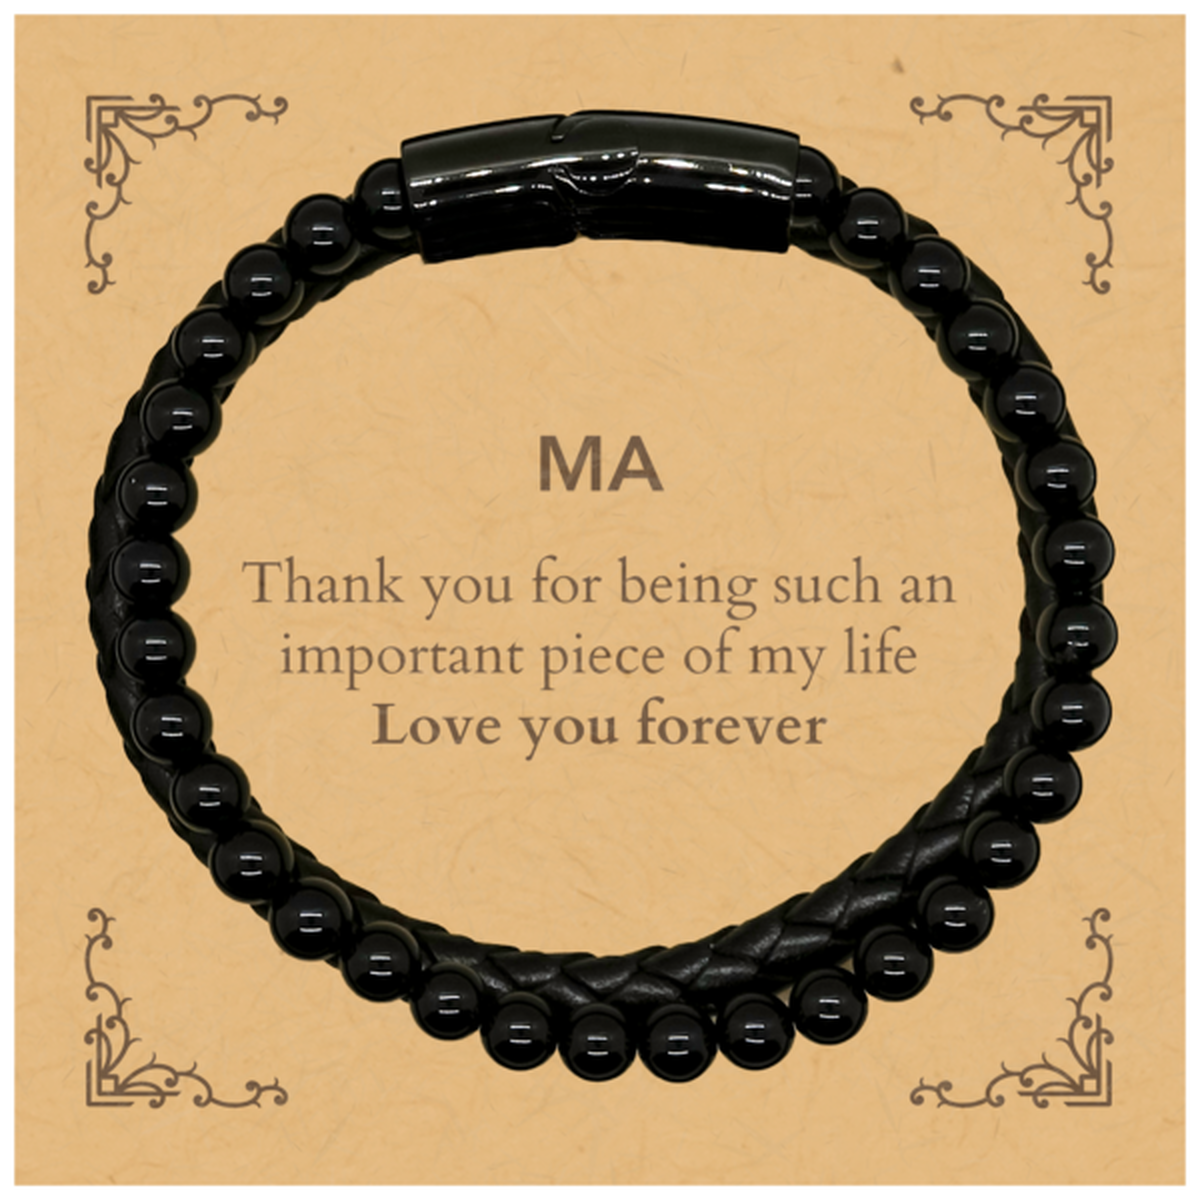 Appropriate Ma Stone Leather Bracelets Epic Birthday Gifts for Ma Thank you for being such an important piece of my life Ma Christmas Mothers Fathers Day